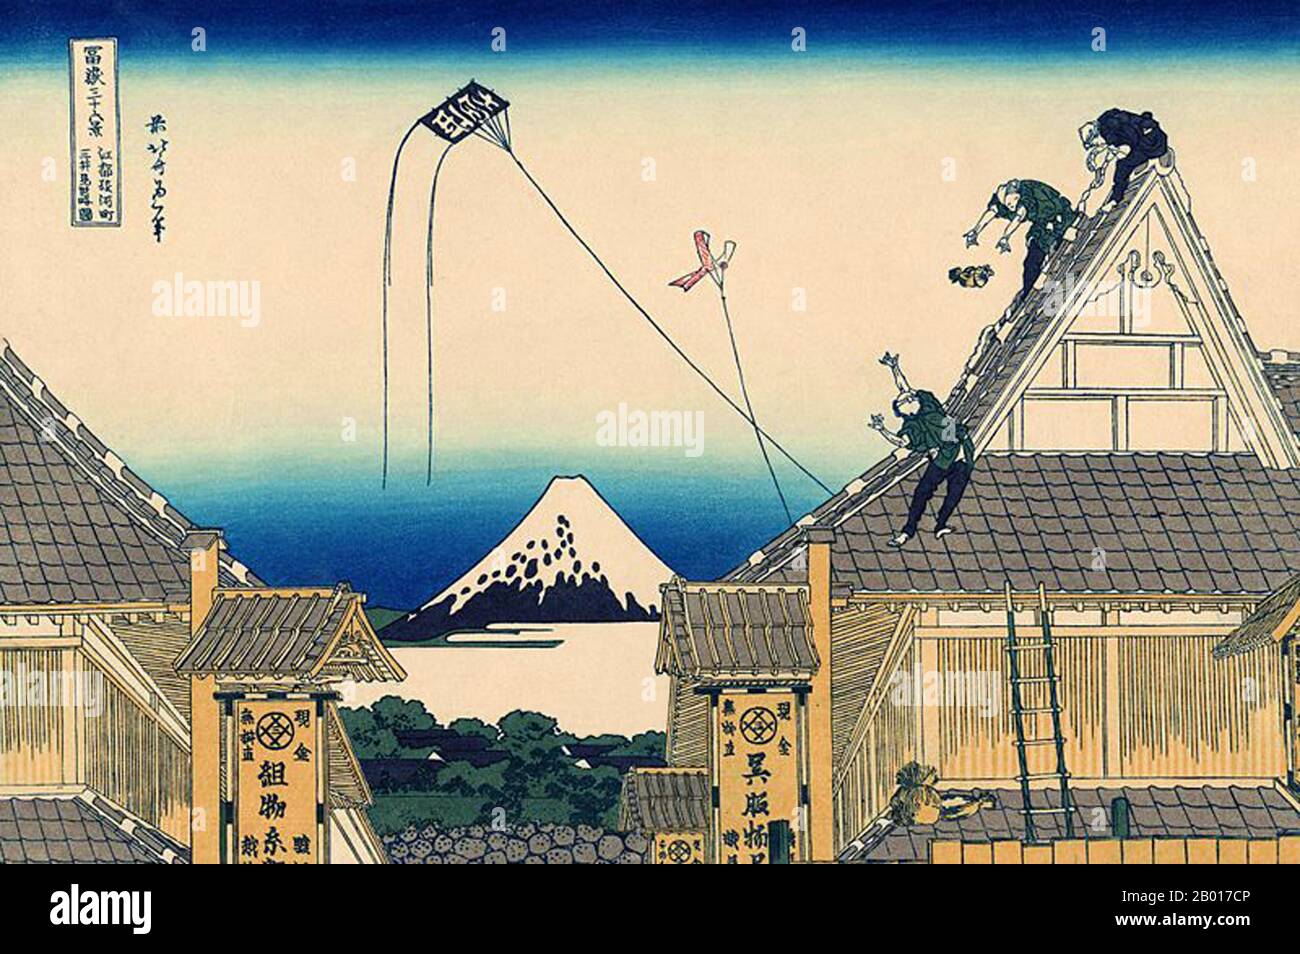 Japan: ‘The Mitsui Shop in Suruga'. Ukiyo-e woodblock print from the series ‘Thirty-Six Views of Mount Fuji’ by Katsushika Hokusai (31 October 1760 - 10 May 1849), 1830.  ‘Thirty-six Views of Mount Fuji’ is an ‘ukiyo-e’ series of woodcut prints by Japanese artist Katsushika Hokusai. The series depicts Mount Fuji in differing seasons and weather conditions from a variety of places and distances. It actually consists of 46 prints created between 1826 and 1833. The first 36 were included in the original publication and, due to their popularity, 10 more were added after the original publication. Stock Photo